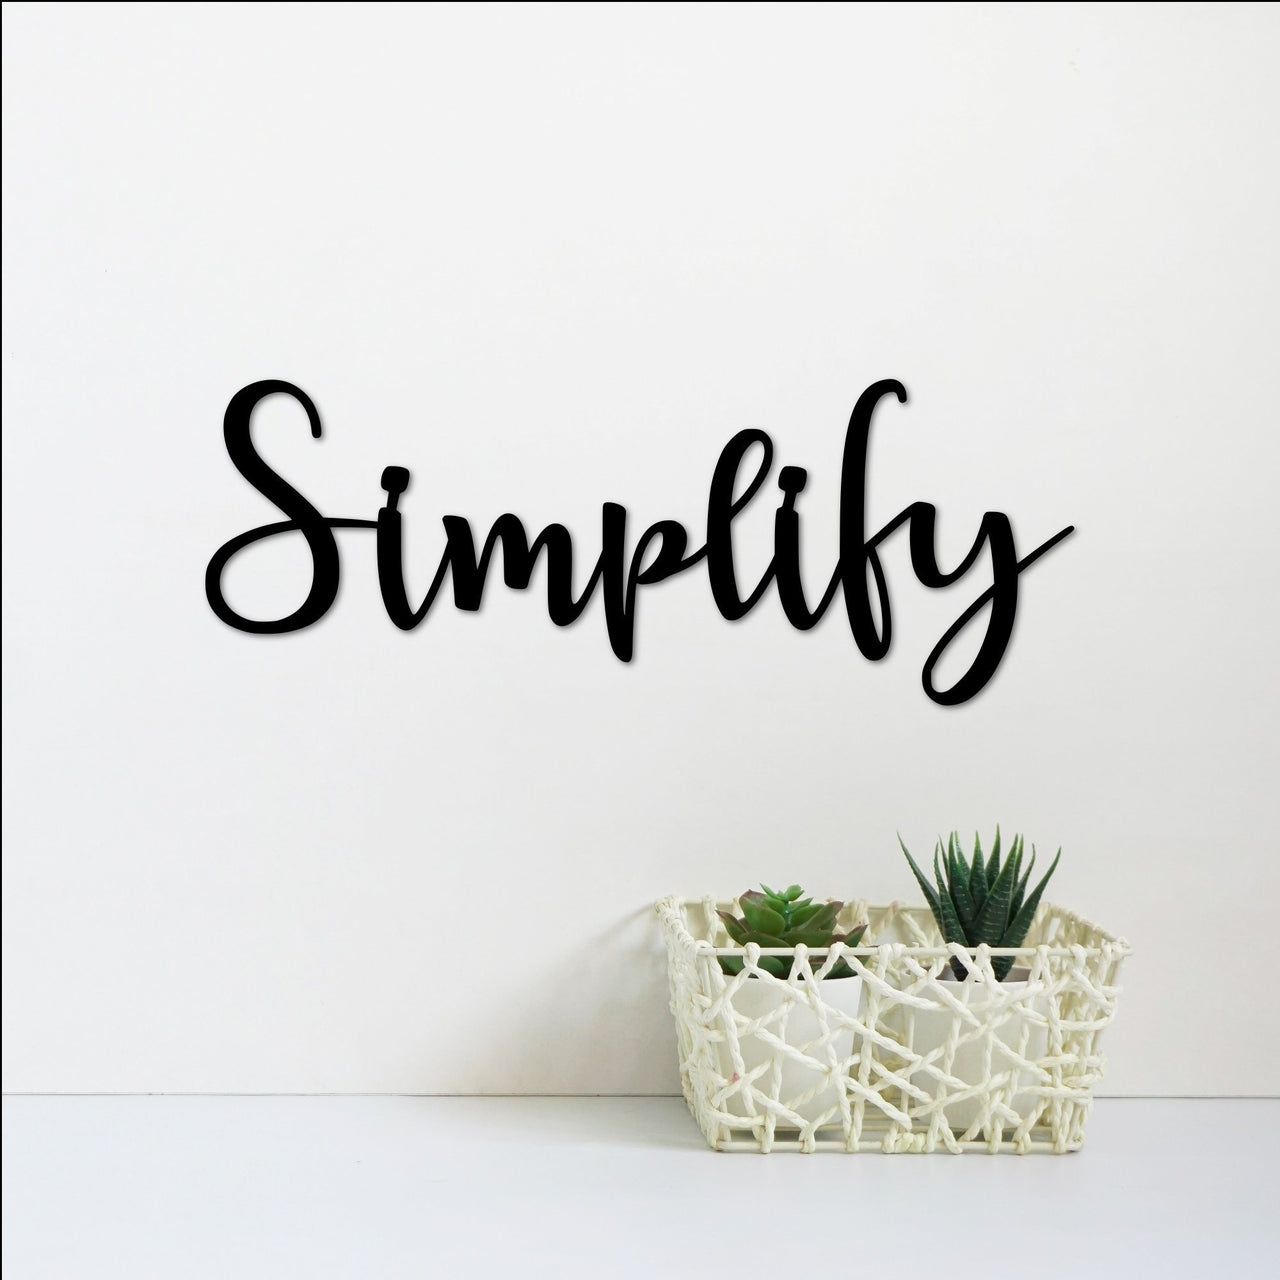 Simplify Wall Sign | Inspirational Decor | Metal Wall Art | Minimalist Quote Signs | Script Words for the Wall | Farmhouse Rustic Decor